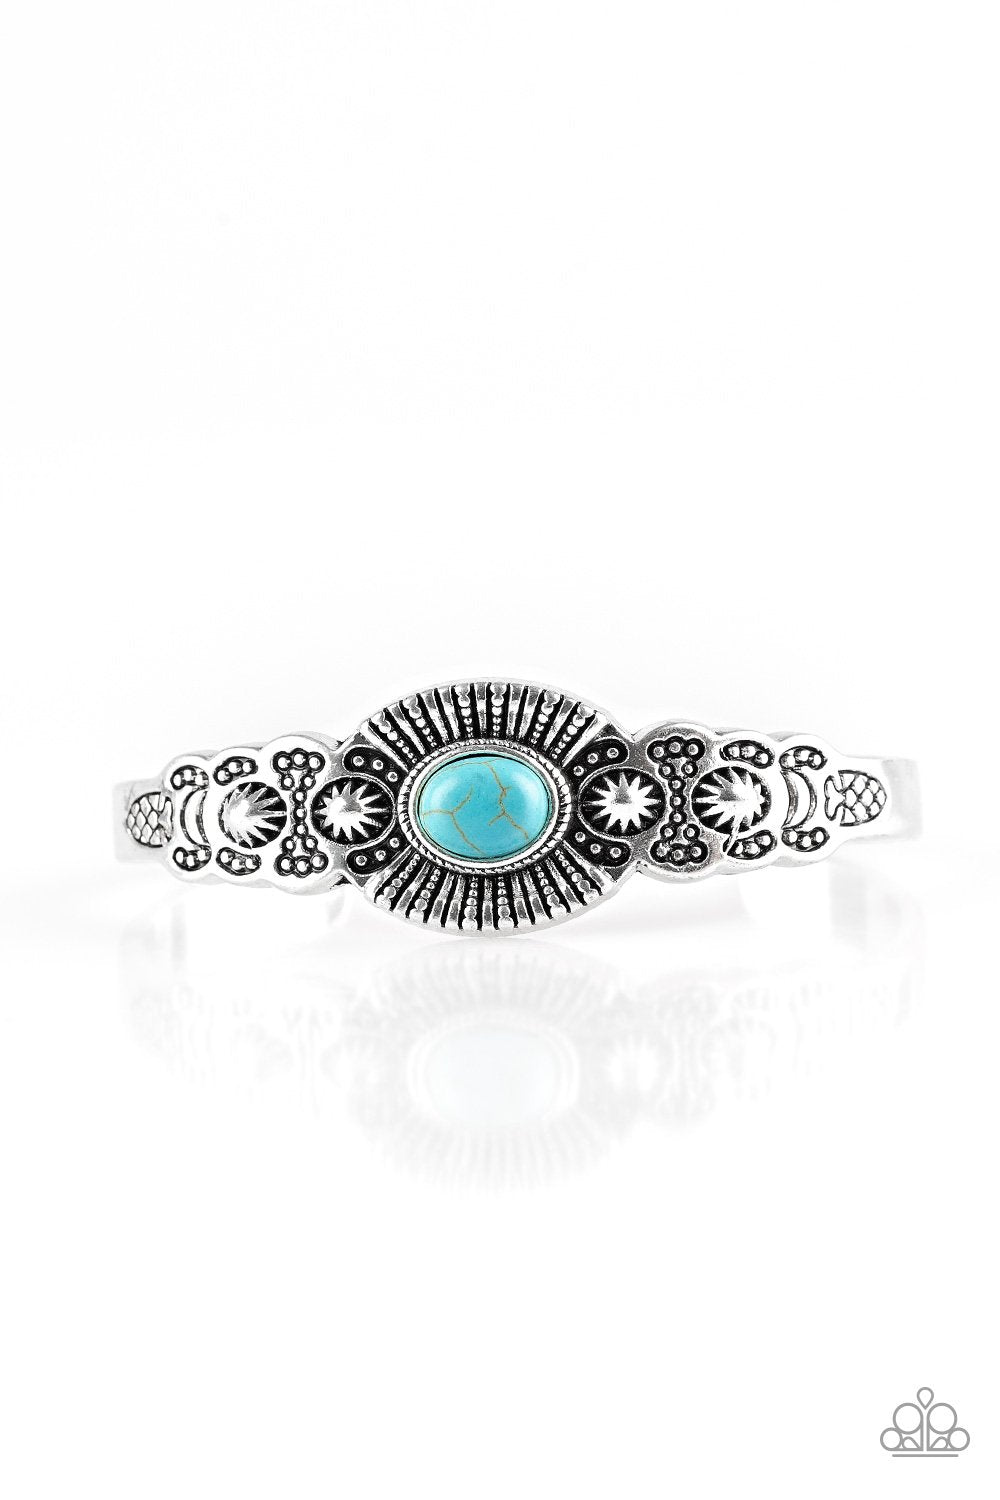 Wide Open Mesas Turquoise Blue Stone and Silver Cuff Bracelet - Paparazzi Accessories - lightbox -CarasShop.com - $5 Jewelry by Cara Jewels